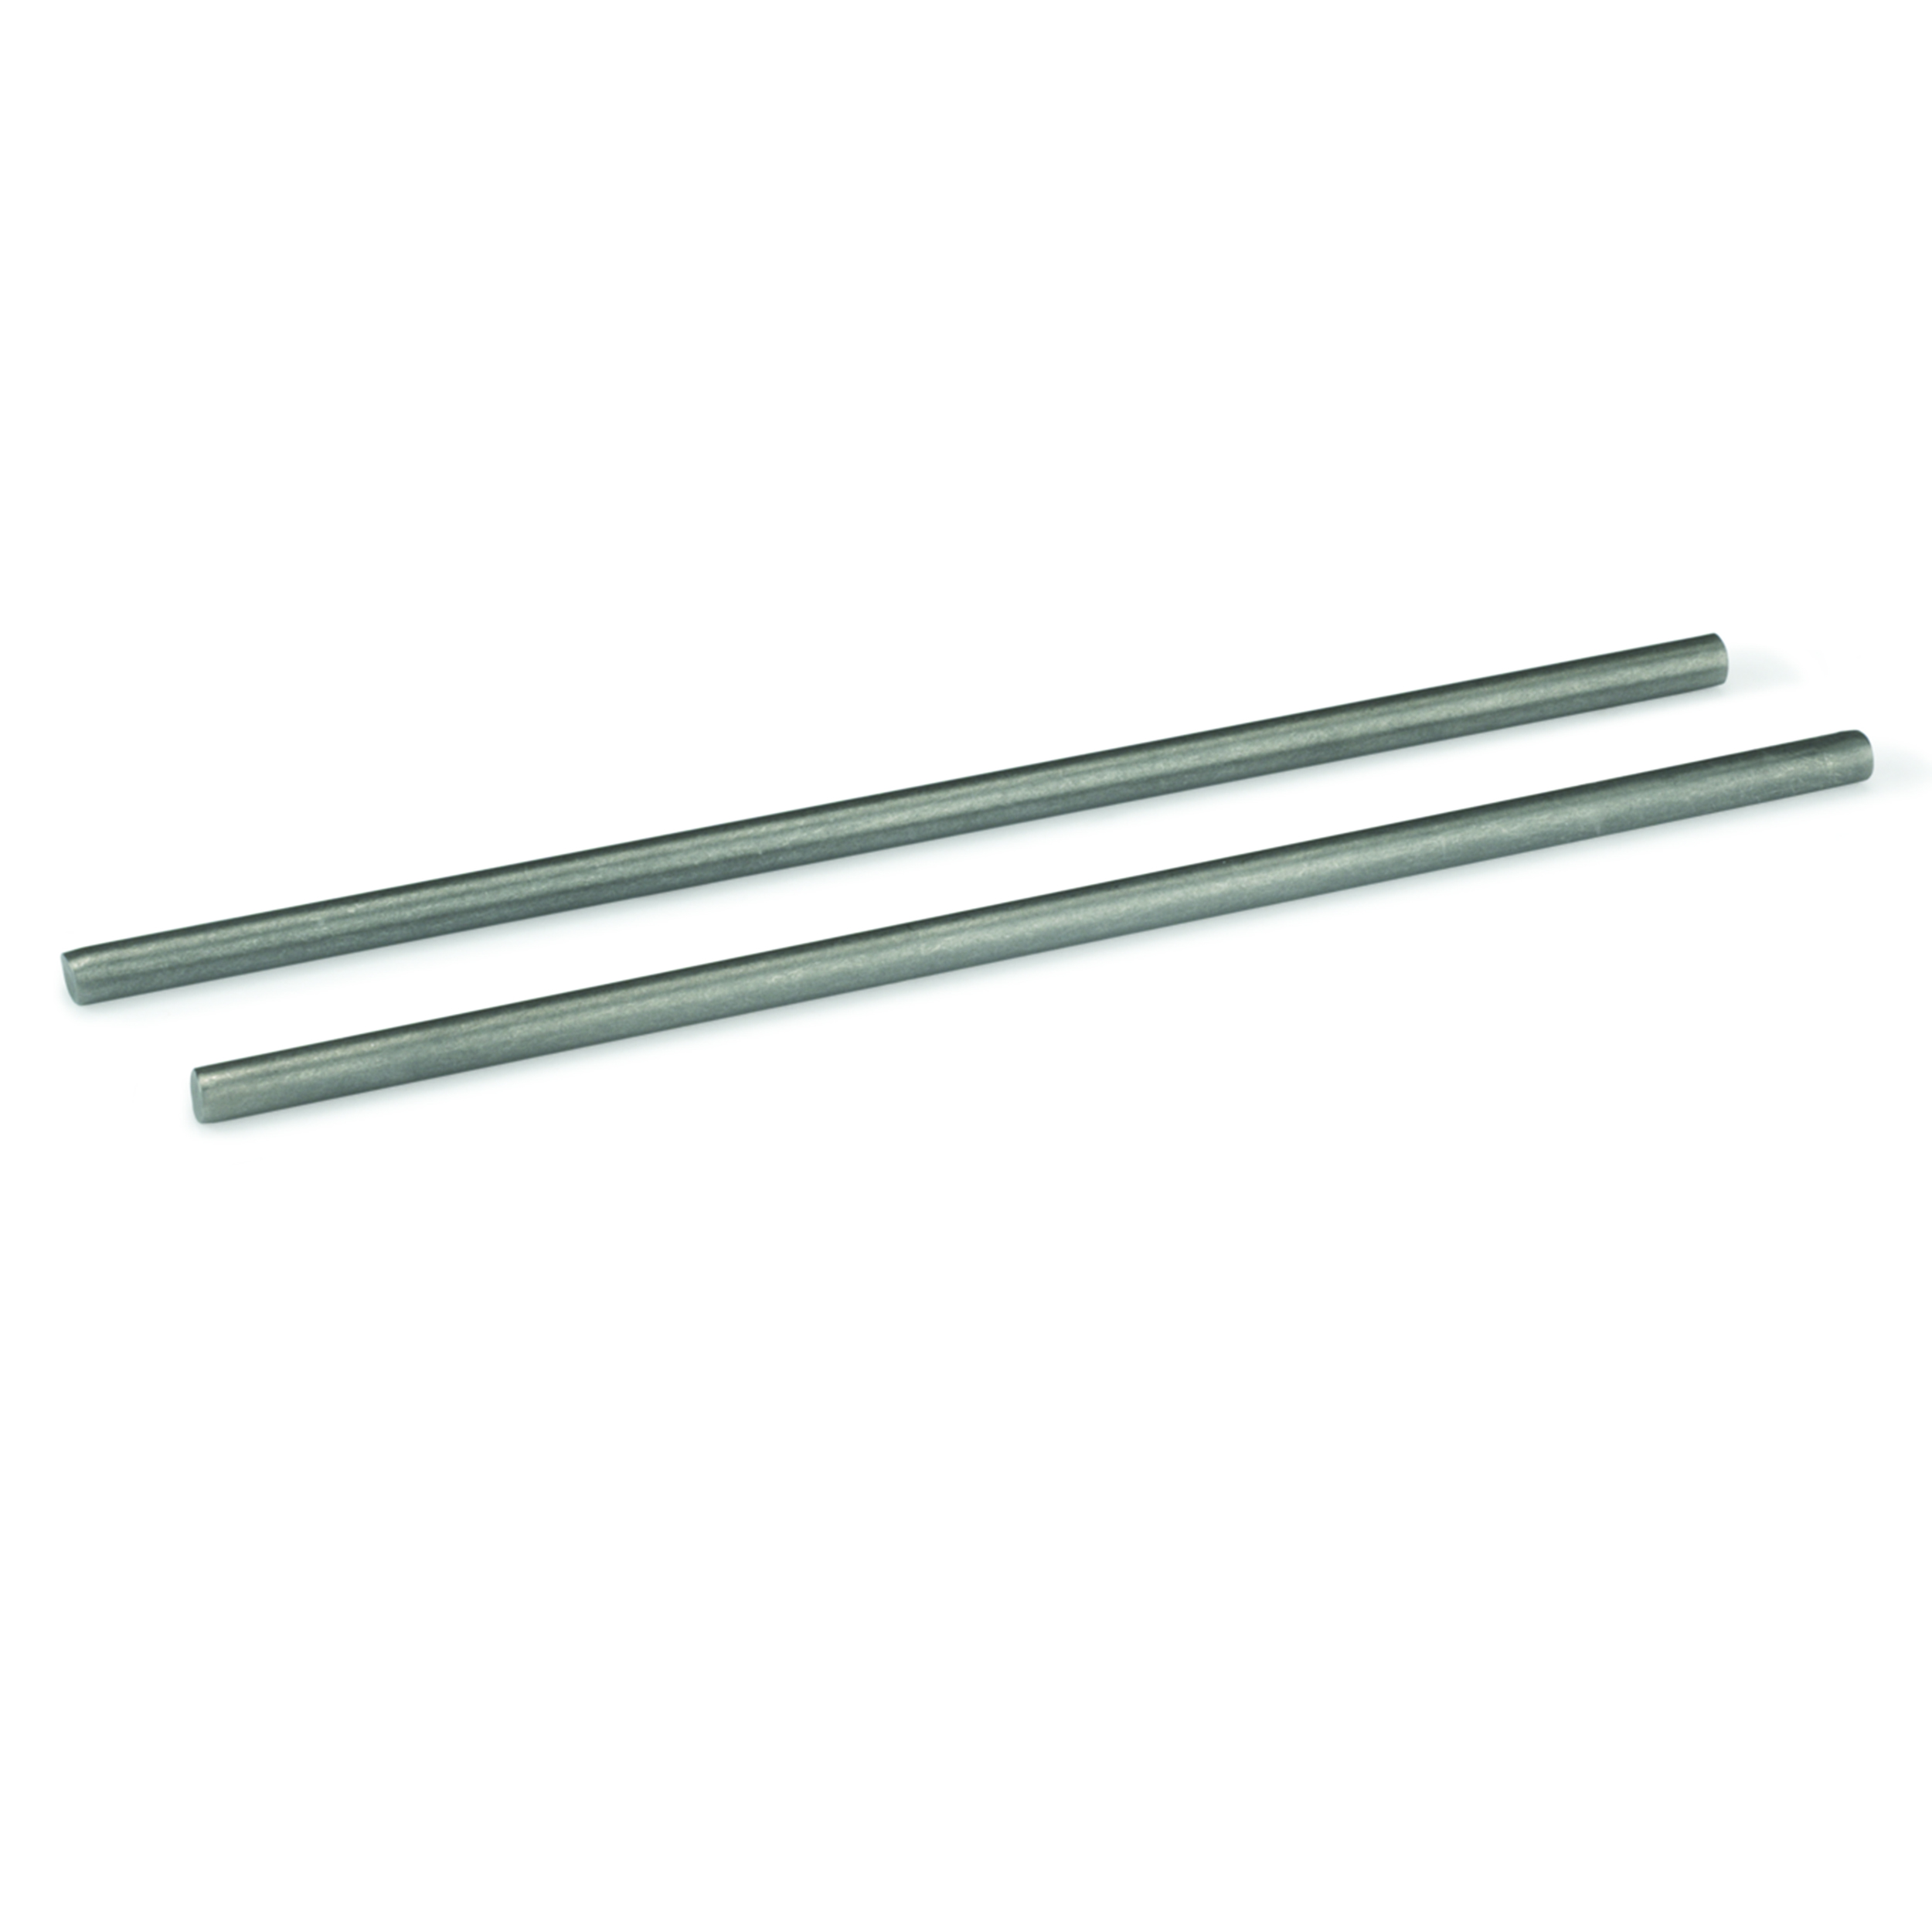 303 Stainless Steel Knife Pin Stock 3/16" X 6 Inch 2pcs.